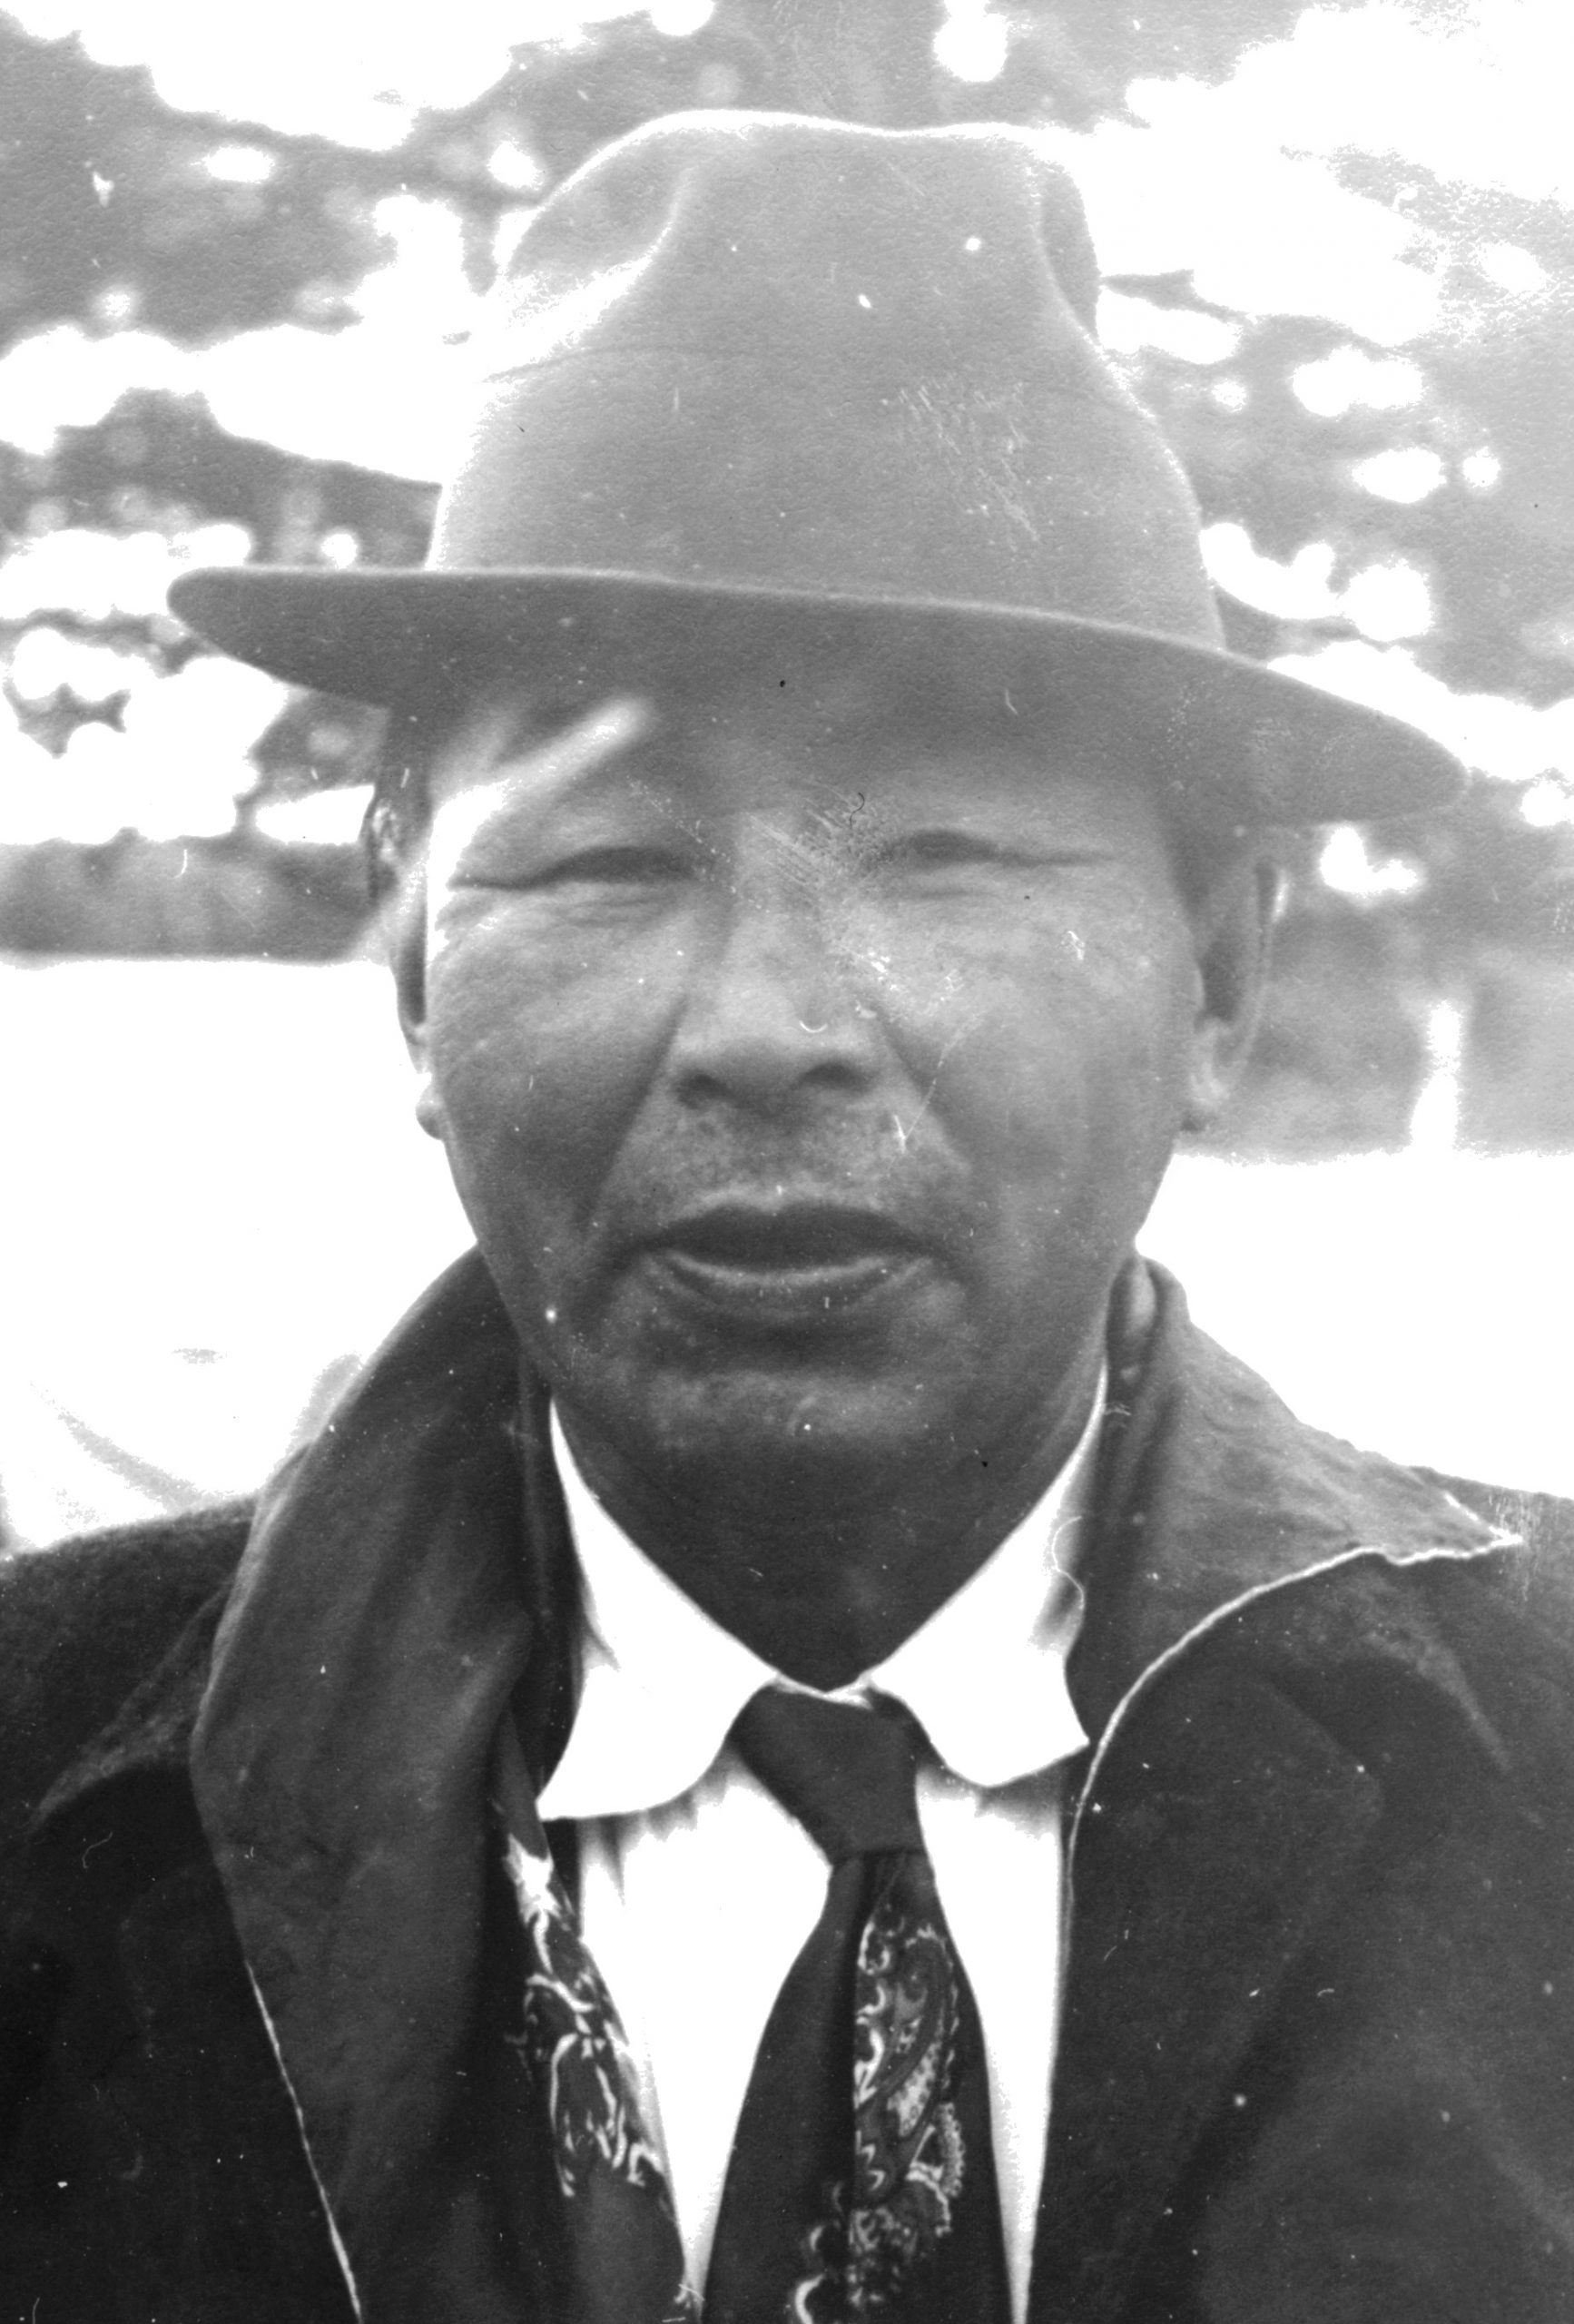 Close-up portrait of a former Lac Simon chief. He is wearing a hat, shirt, tie and jacket. Black and white picture.